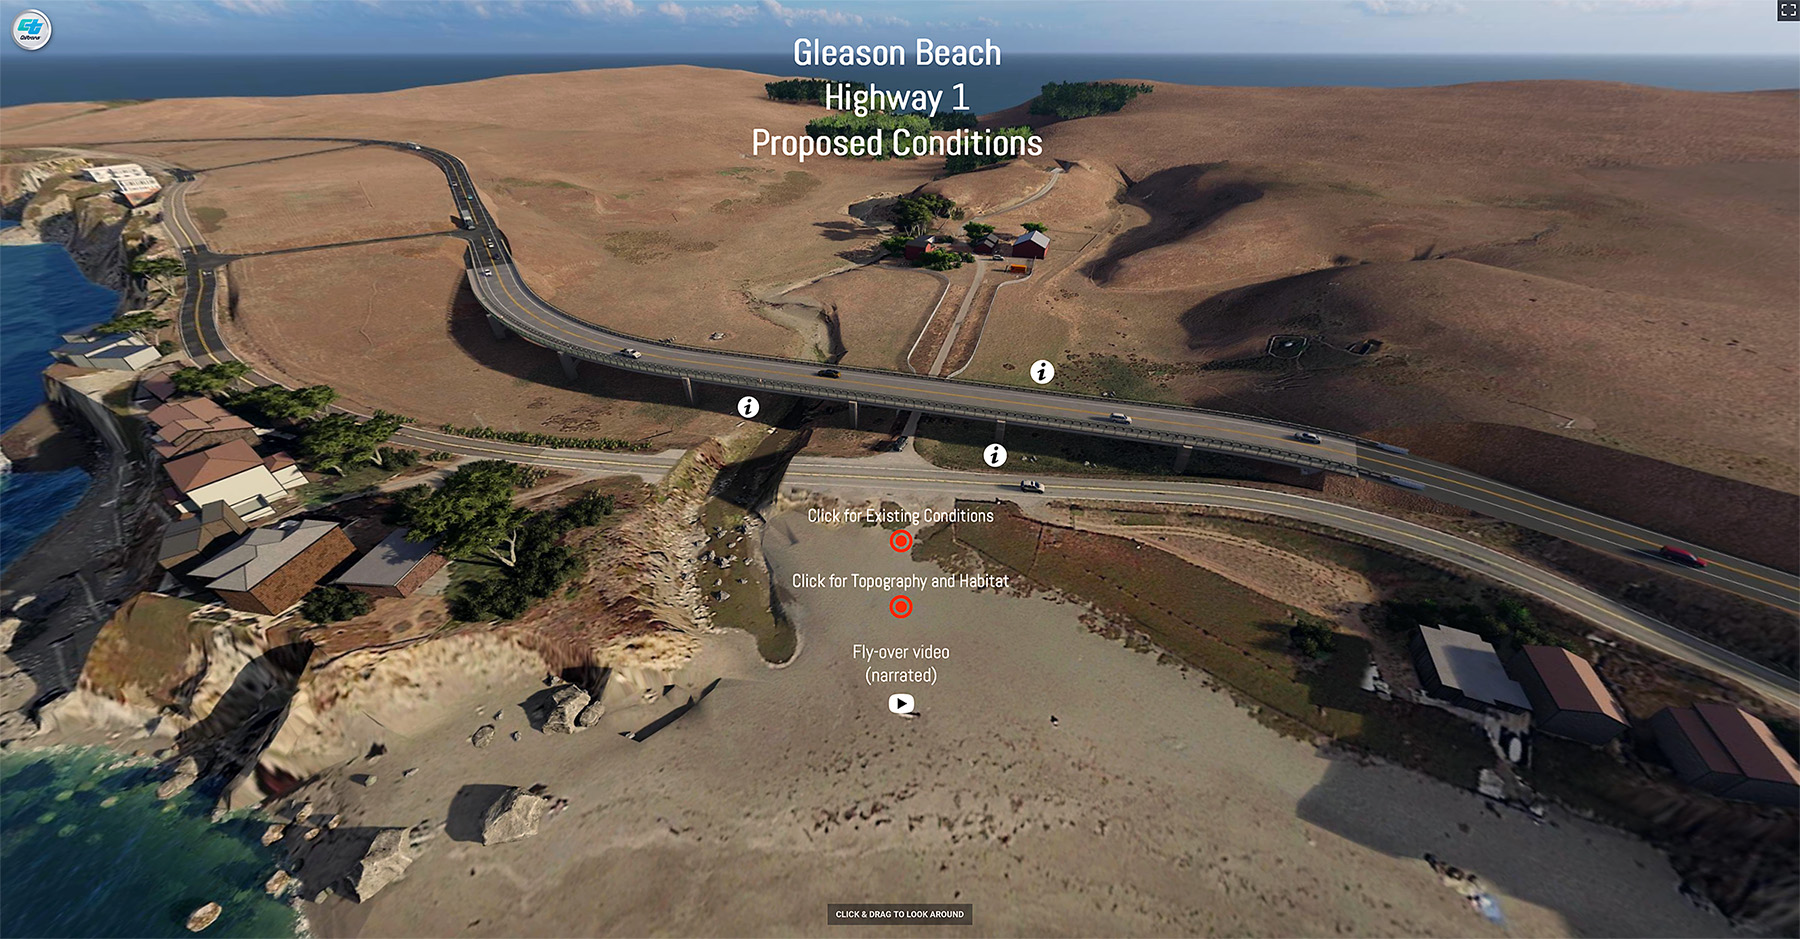 Website homepage image for Gleason Beach Highway 1 project from California DOT.